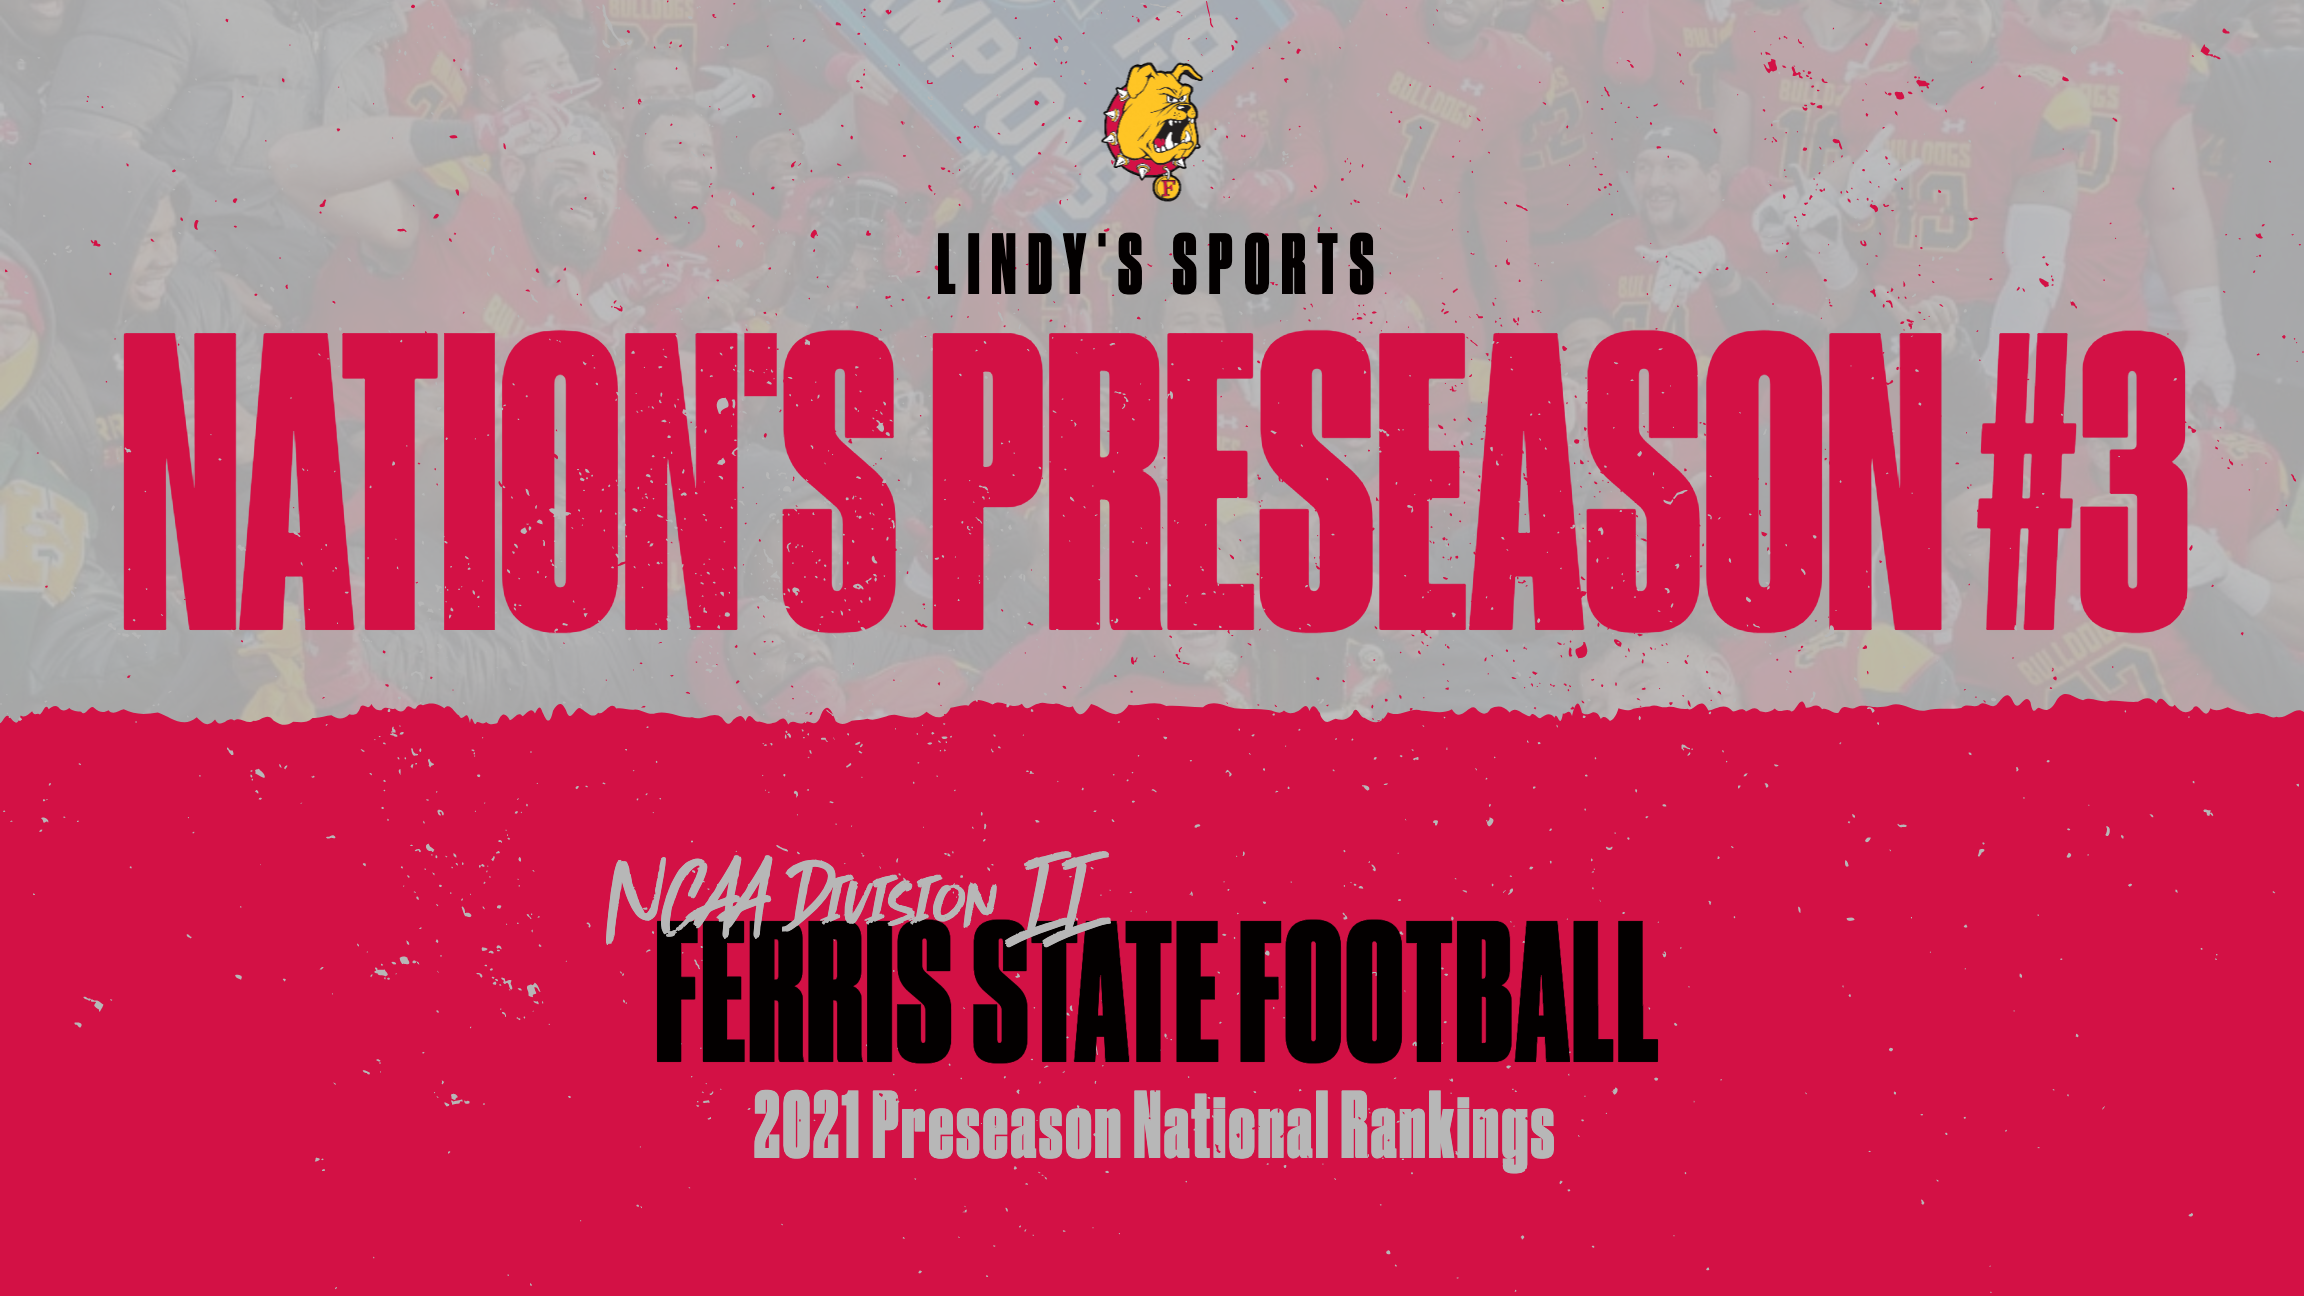 Ferris State Tabbed As Nation's Preseason #3 Team By Lindy's Sports With Two Preseason All-Americans